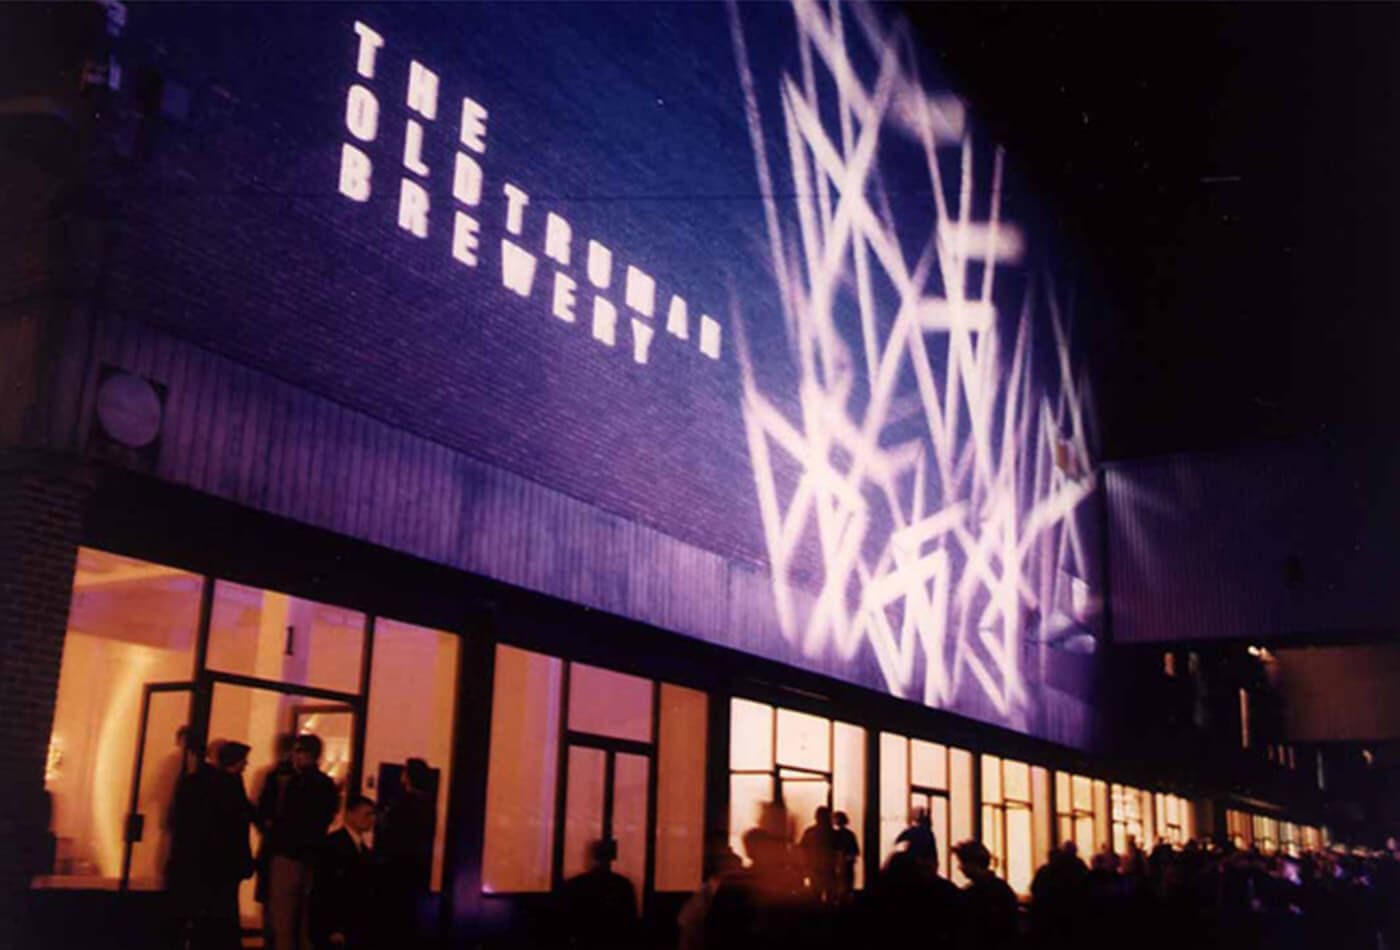 Outdoor shot of concrete building at night with abstract art projected onto the wall